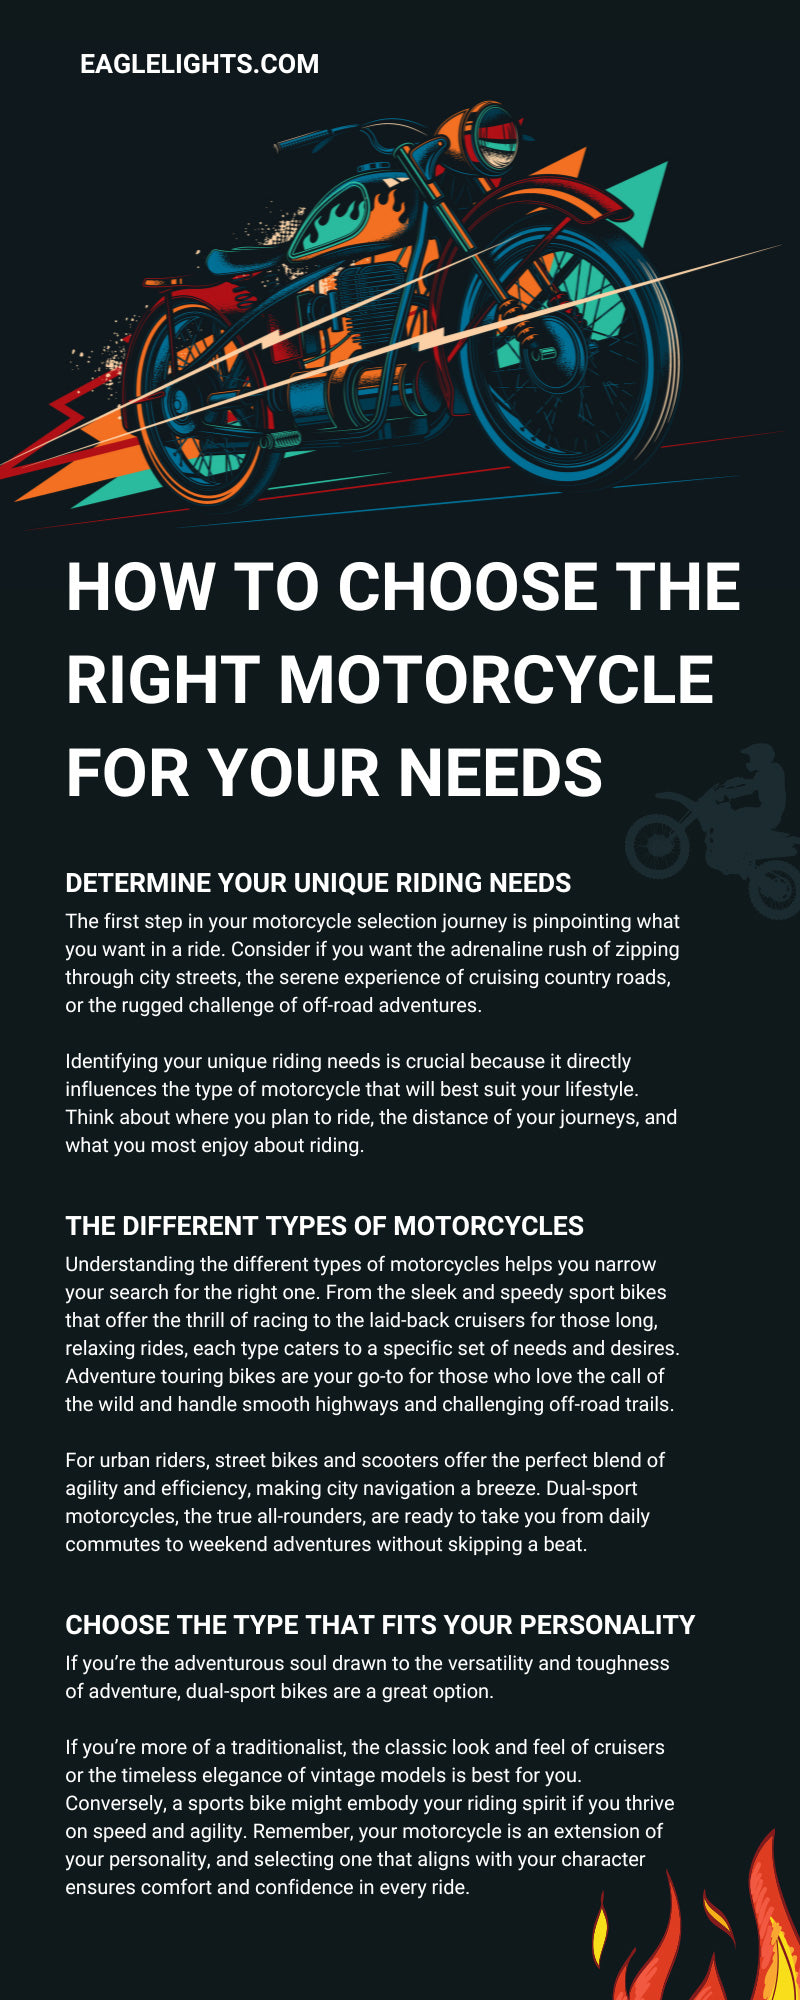 How To Choose the Right Motorcycle for Your Needs